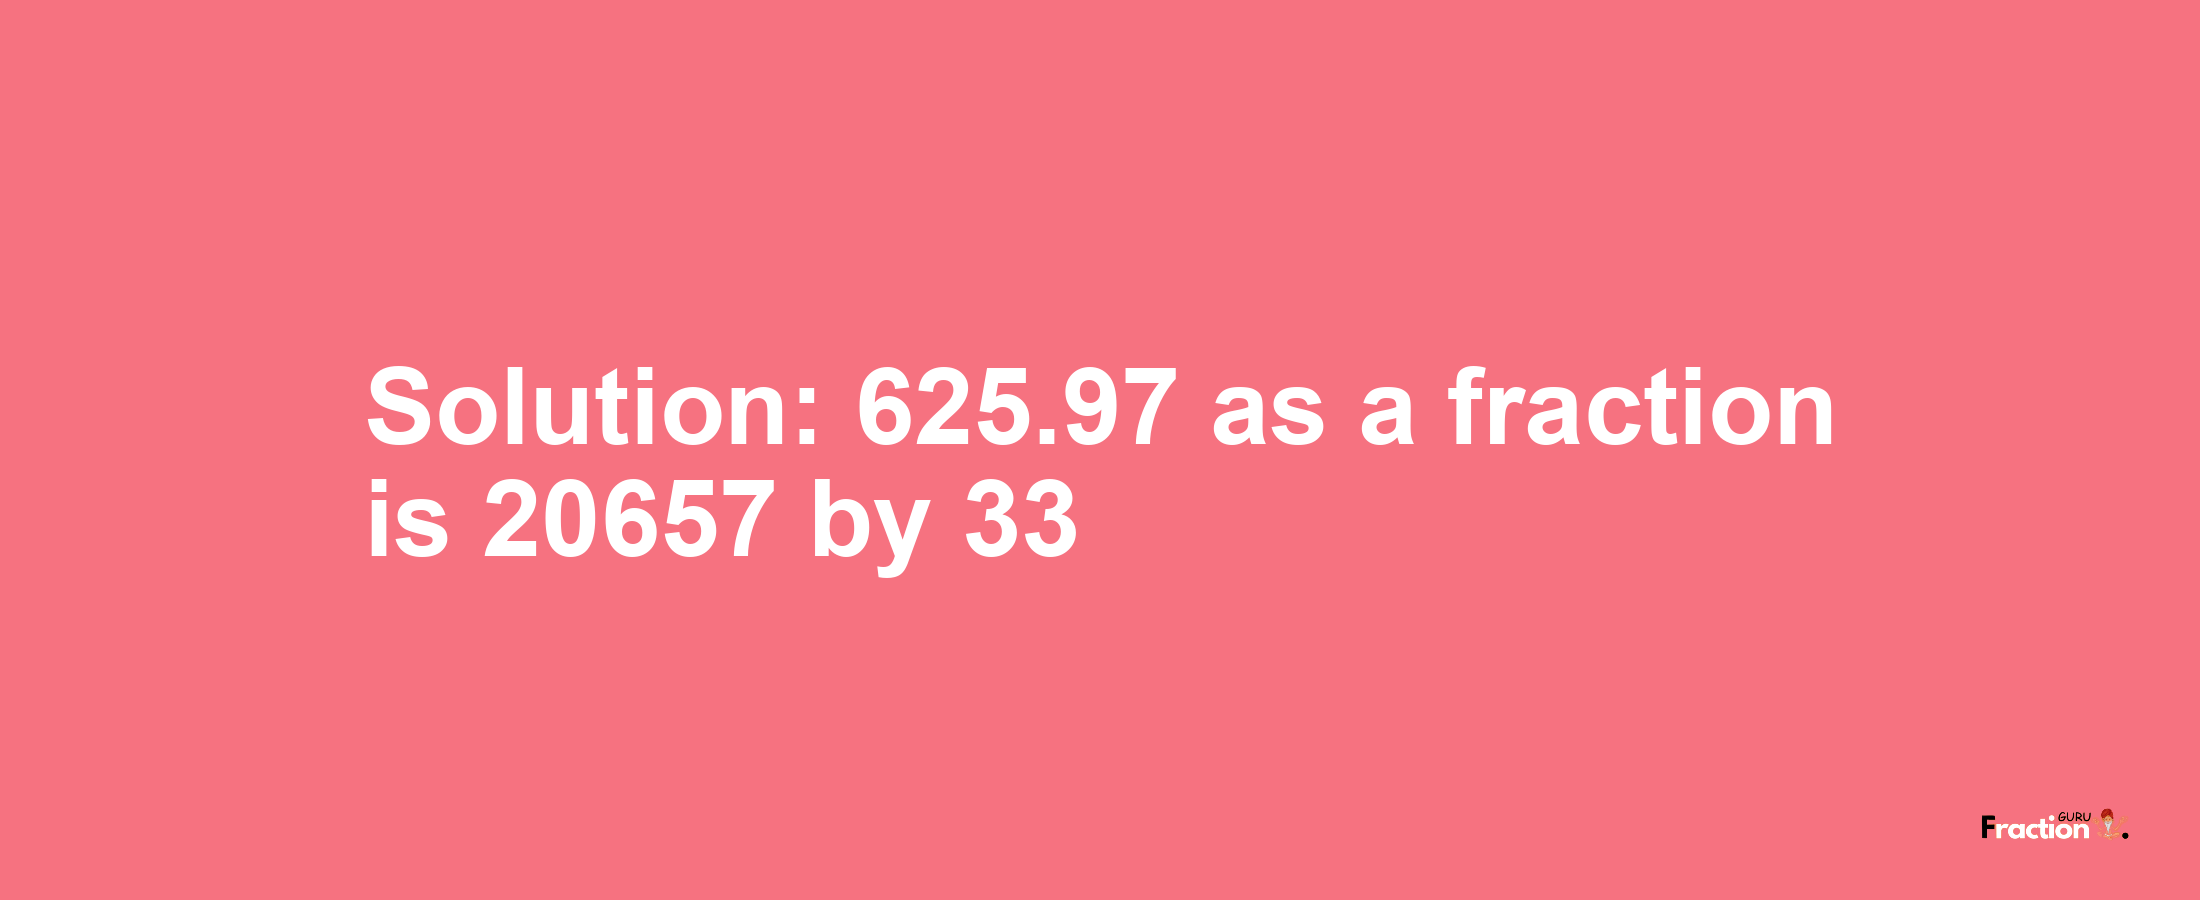 Solution:625.97 as a fraction is 20657/33